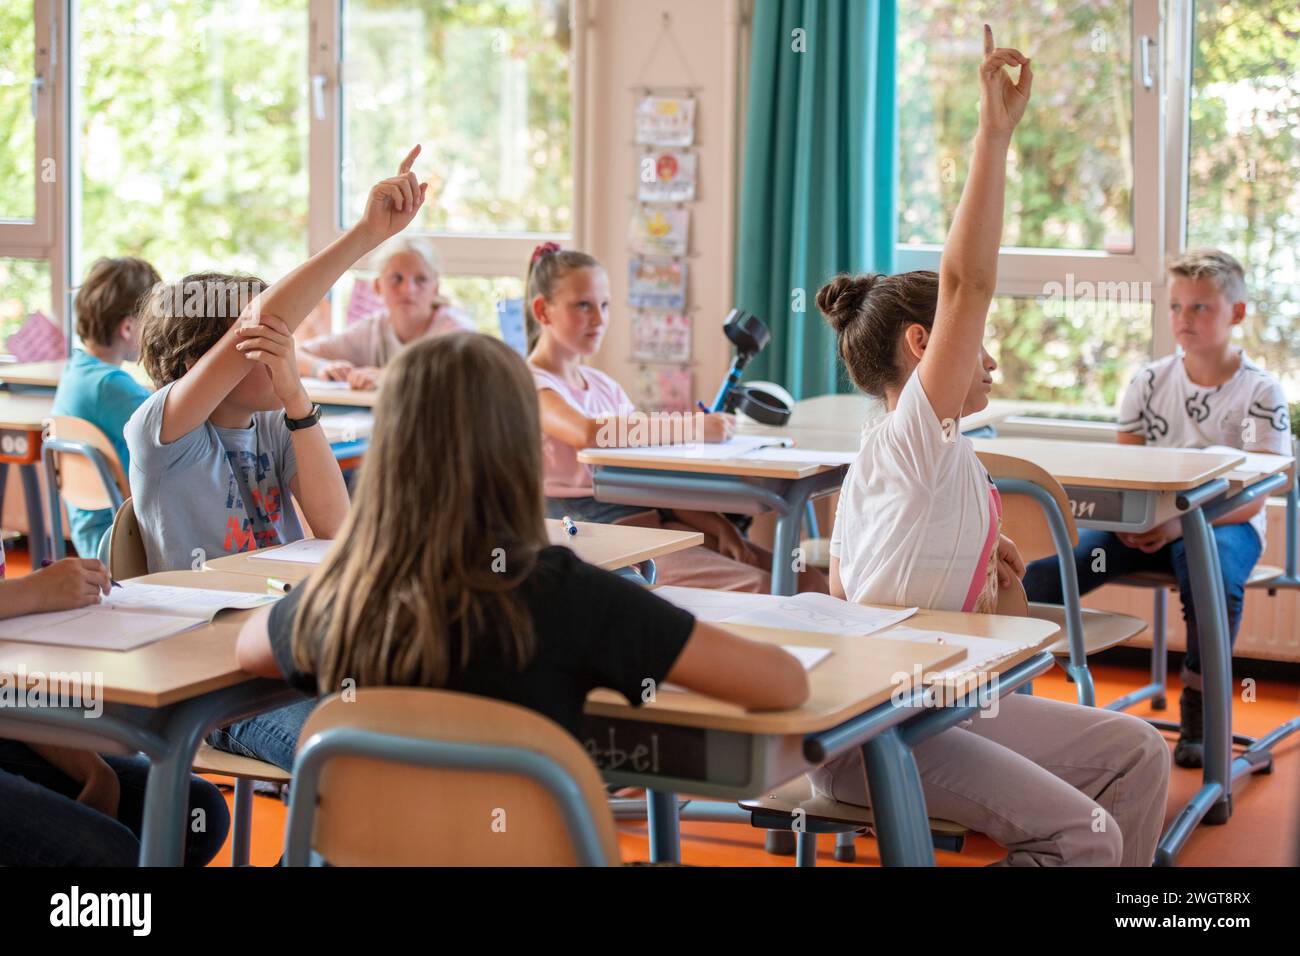 Group of young students in class putting their hands up for a question to the teacher Stock Photo